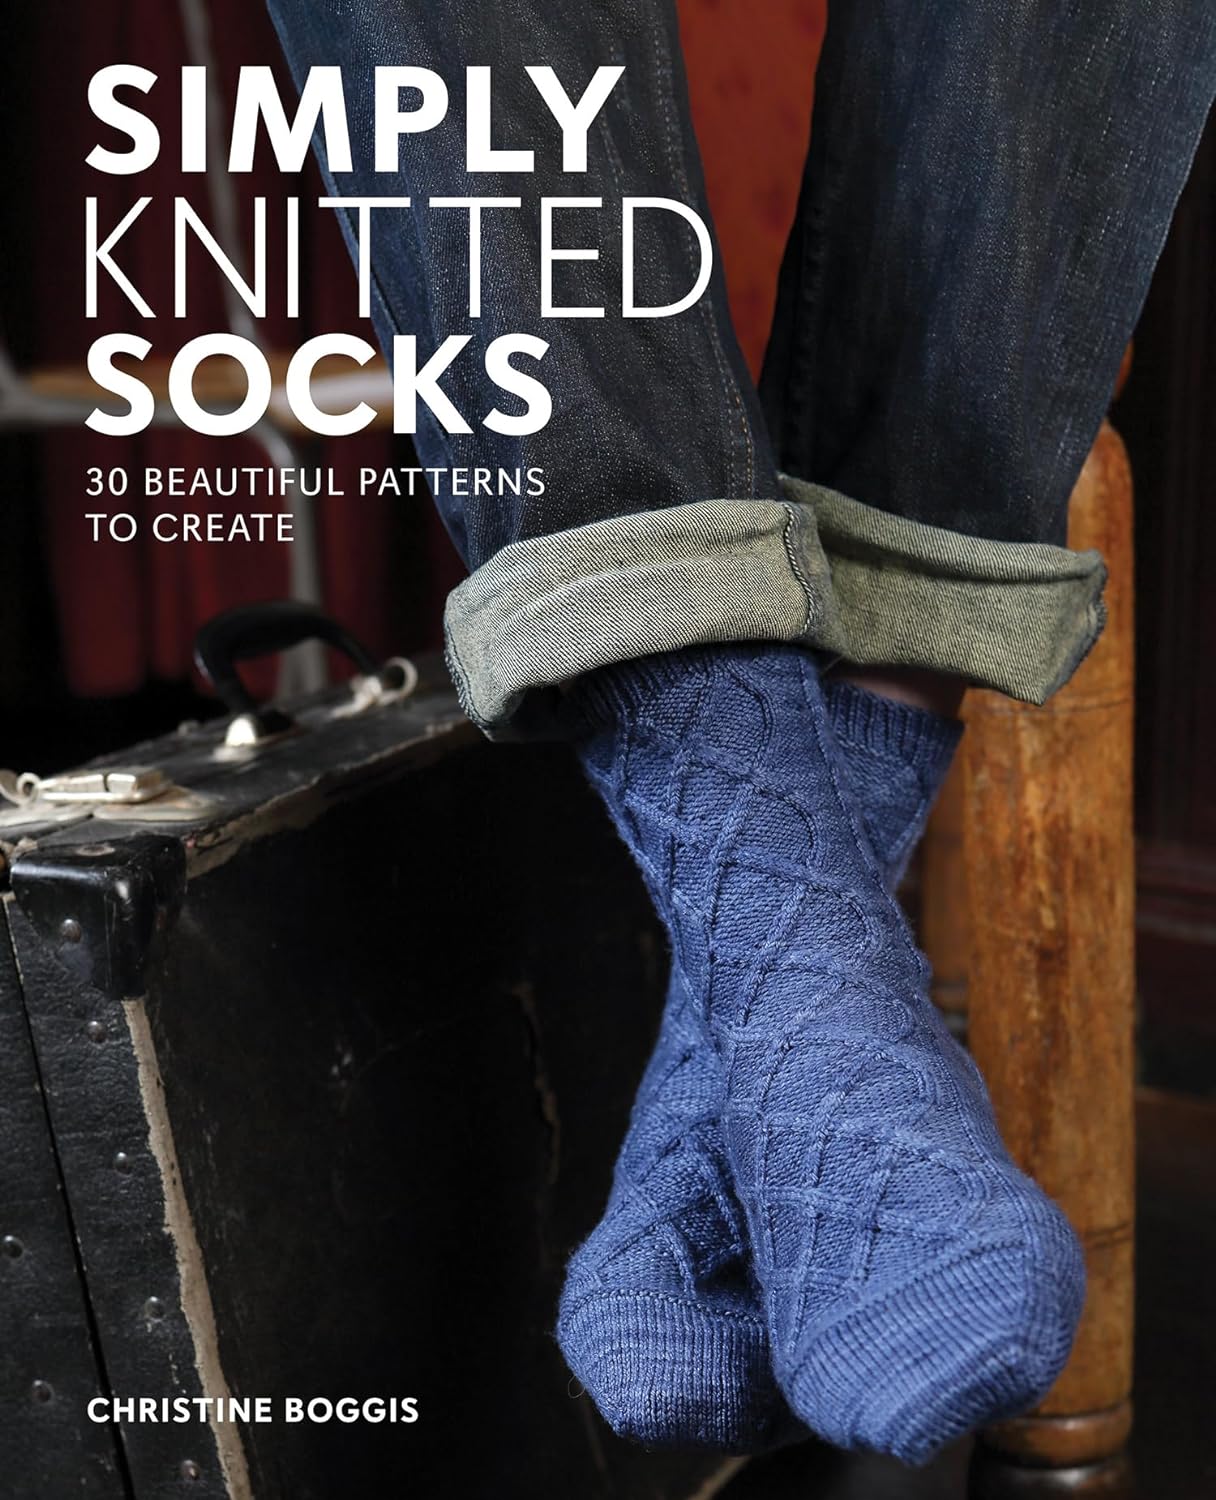 Simply Knitted Socks